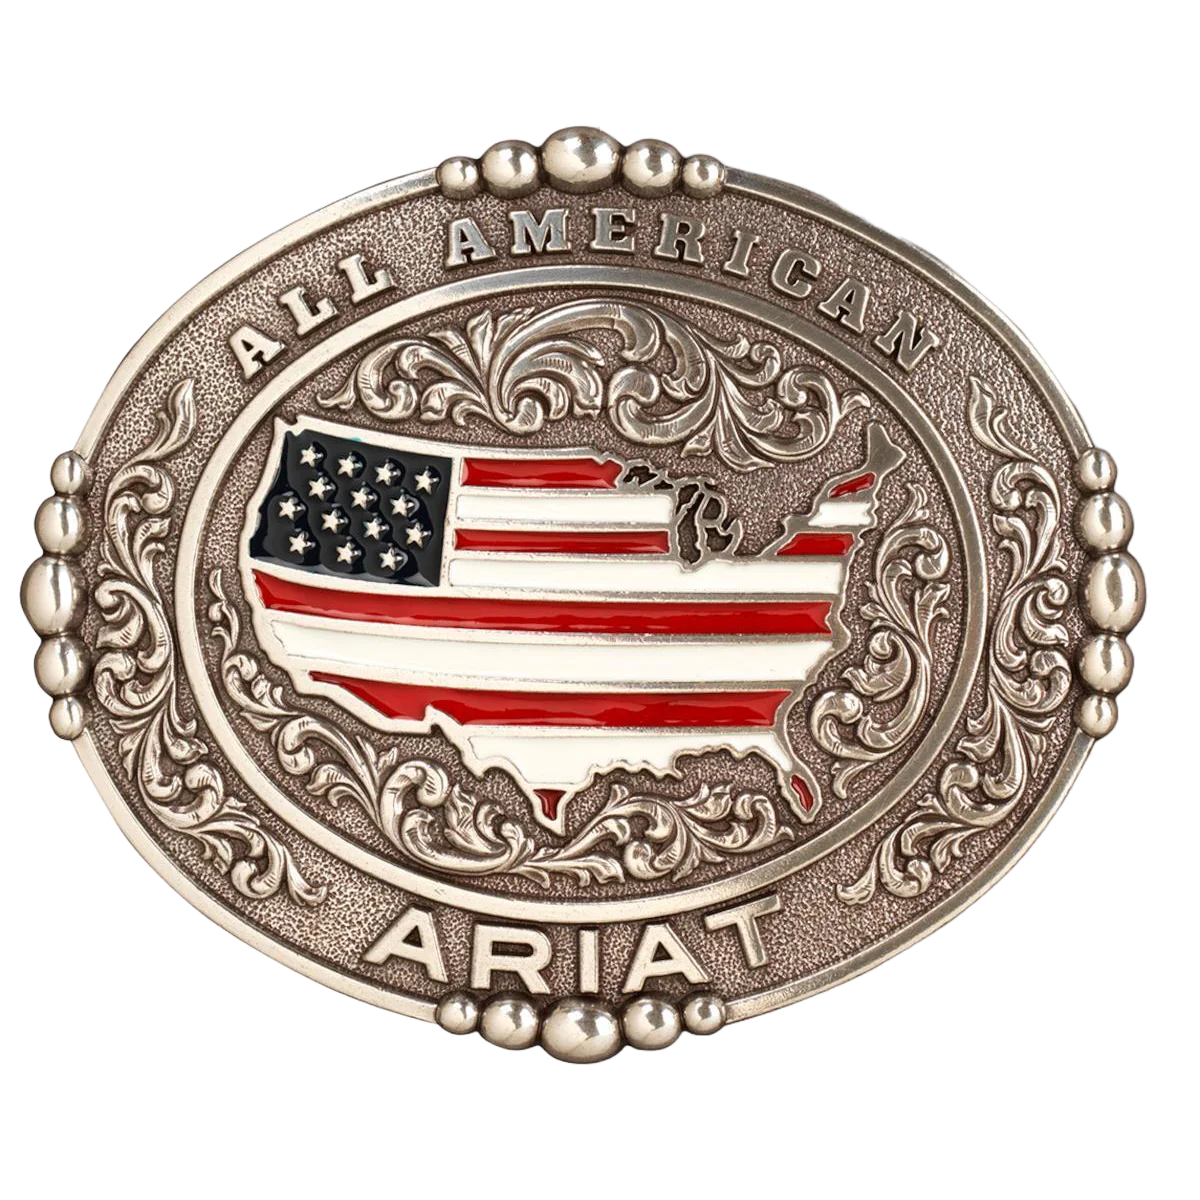 A37052 Ariat Men's Oval All American Buckle